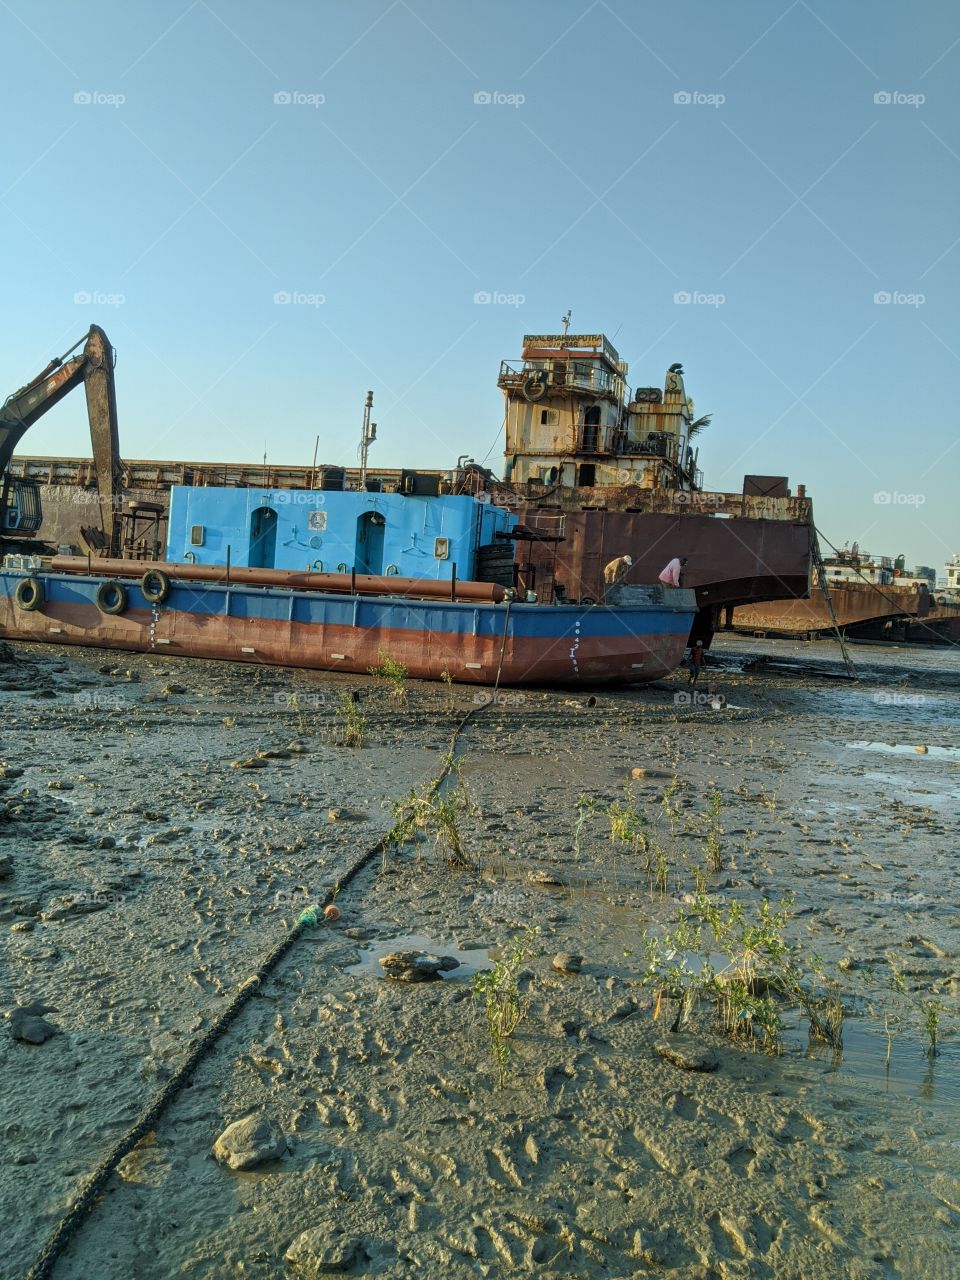 Small ship in bay of Ghogha